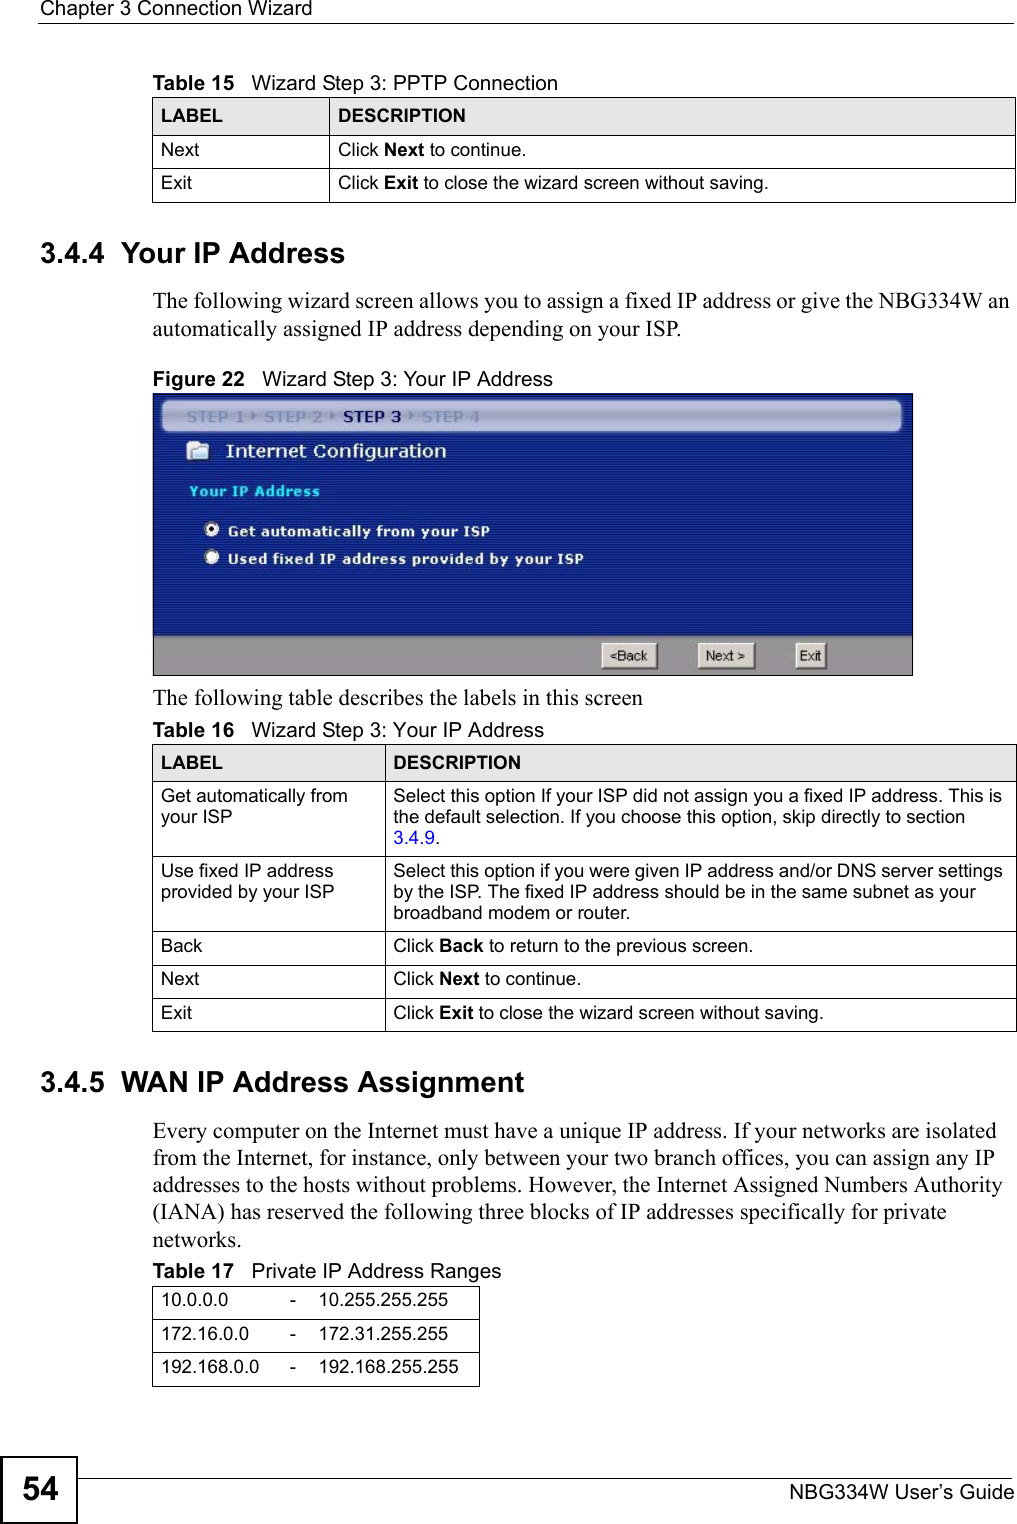 Chapter 3 Connection WizardNBG334W User’s Guide543.4.4  Your IP AddressThe following wizard screen allows you to assign a fixed IP address or give the NBG334W an automatically assigned IP address depending on your ISP.Figure 22   Wizard Step 3: Your IP AddressThe following table describes the labels in this screen3.4.5  WAN IP Address AssignmentEvery computer on the Internet must have a unique IP address. If your networks are isolated from the Internet, for instance, only between your two branch offices, you can assign any IP addresses to the hosts without problems. However, the Internet Assigned Numbers Authority (IANA) has reserved the following three blocks of IP addresses specifically for private networks.Next Click Next to continue. Exit Click Exit to close the wizard screen without saving.Table 15   Wizard Step 3: PPTP ConnectionLABEL DESCRIPTIONTable 16   Wizard Step 3: Your IP AddressLABEL DESCRIPTIONGet automatically from your ISP Select this option If your ISP did not assign you a fixed IP address. This is the default selection. If you choose this option, skip directly to section 3.4.9.Use fixed IP address provided by your ISPSelect this option if you were given IP address and/or DNS server settings by the ISP. The fixed IP address should be in the same subnet as your broadband modem or router. Back Click Back to return to the previous screen.Next Click Next to continue. Exit Click Exit to close the wizard screen without saving.Table 17   Private IP Address Ranges10.0.0.0 -10.255.255.255172.16.0.0 -172.31.255.255192.168.0.0 -192.168.255.255